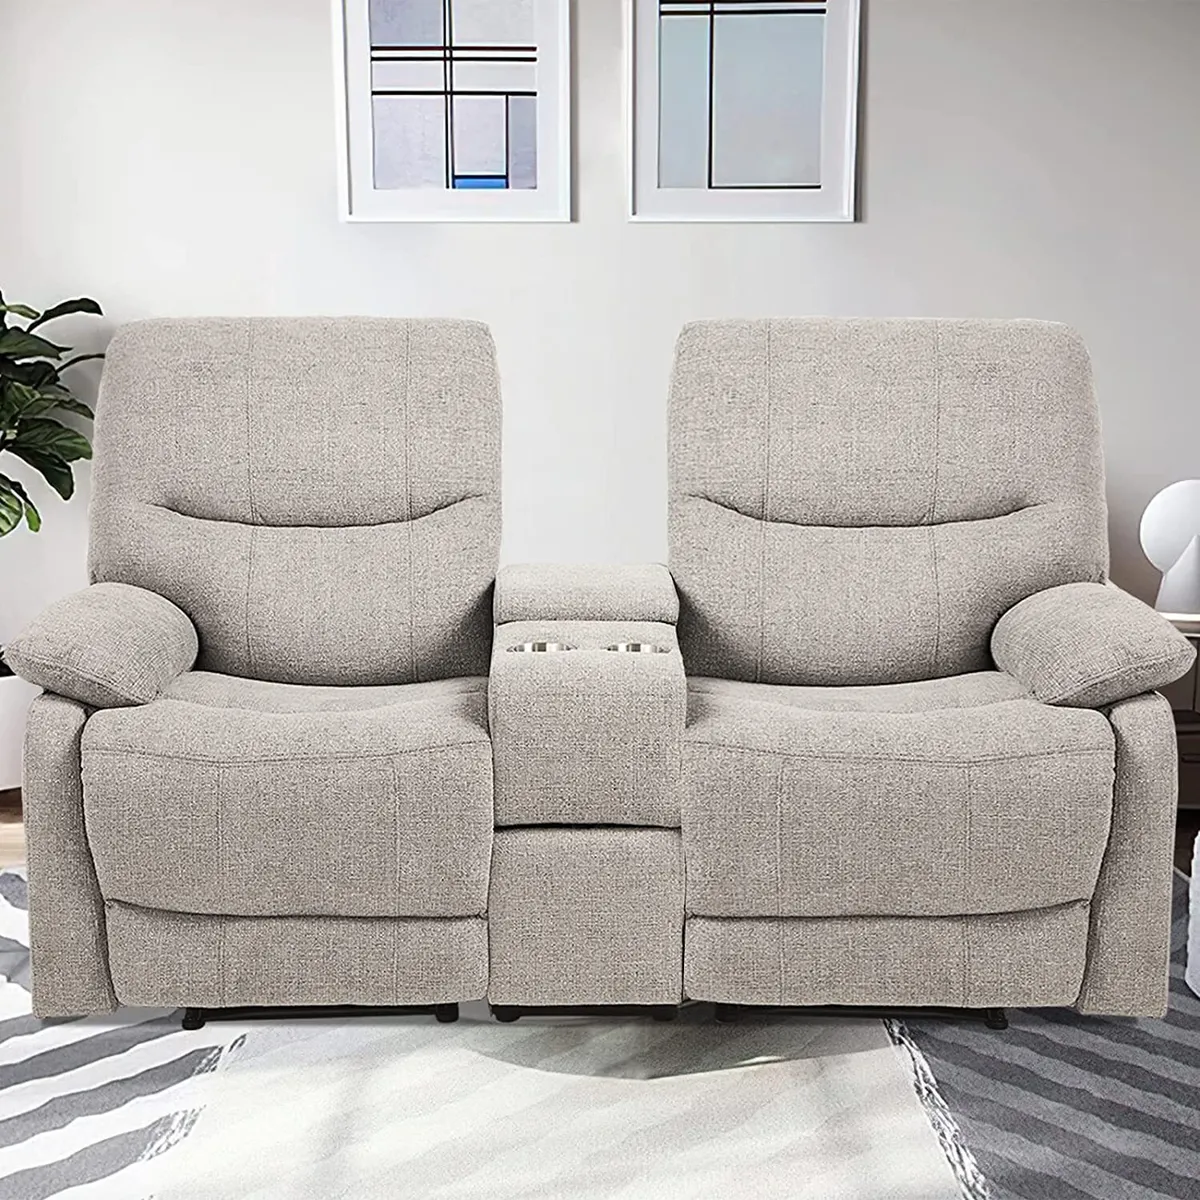 Sink into Comfort: Exploring the Luxury of a Double Recliner Sofa缩略图